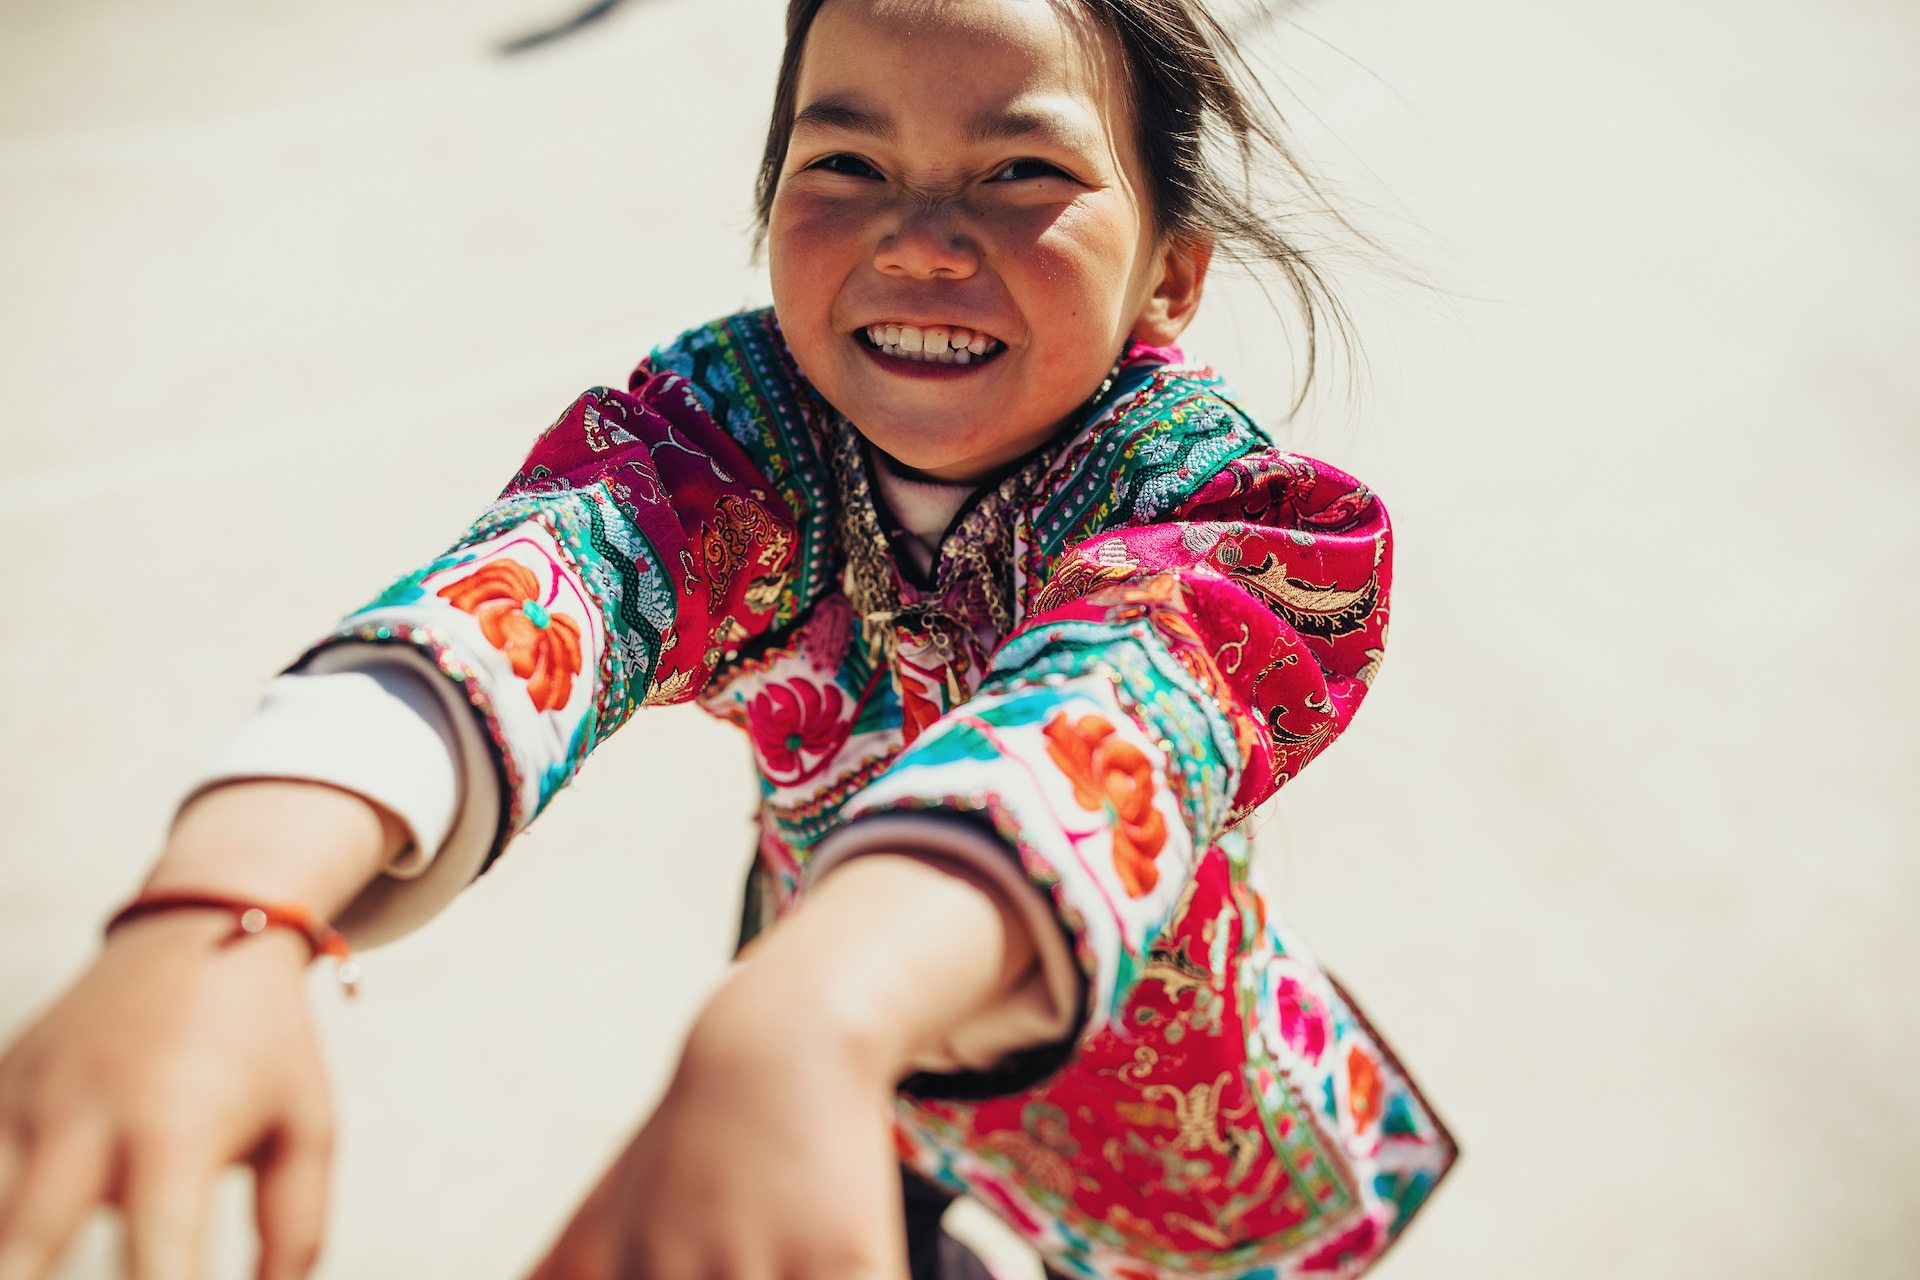 Girl from China in a colourful top smiles as she holds out her arms to the person holding the camera